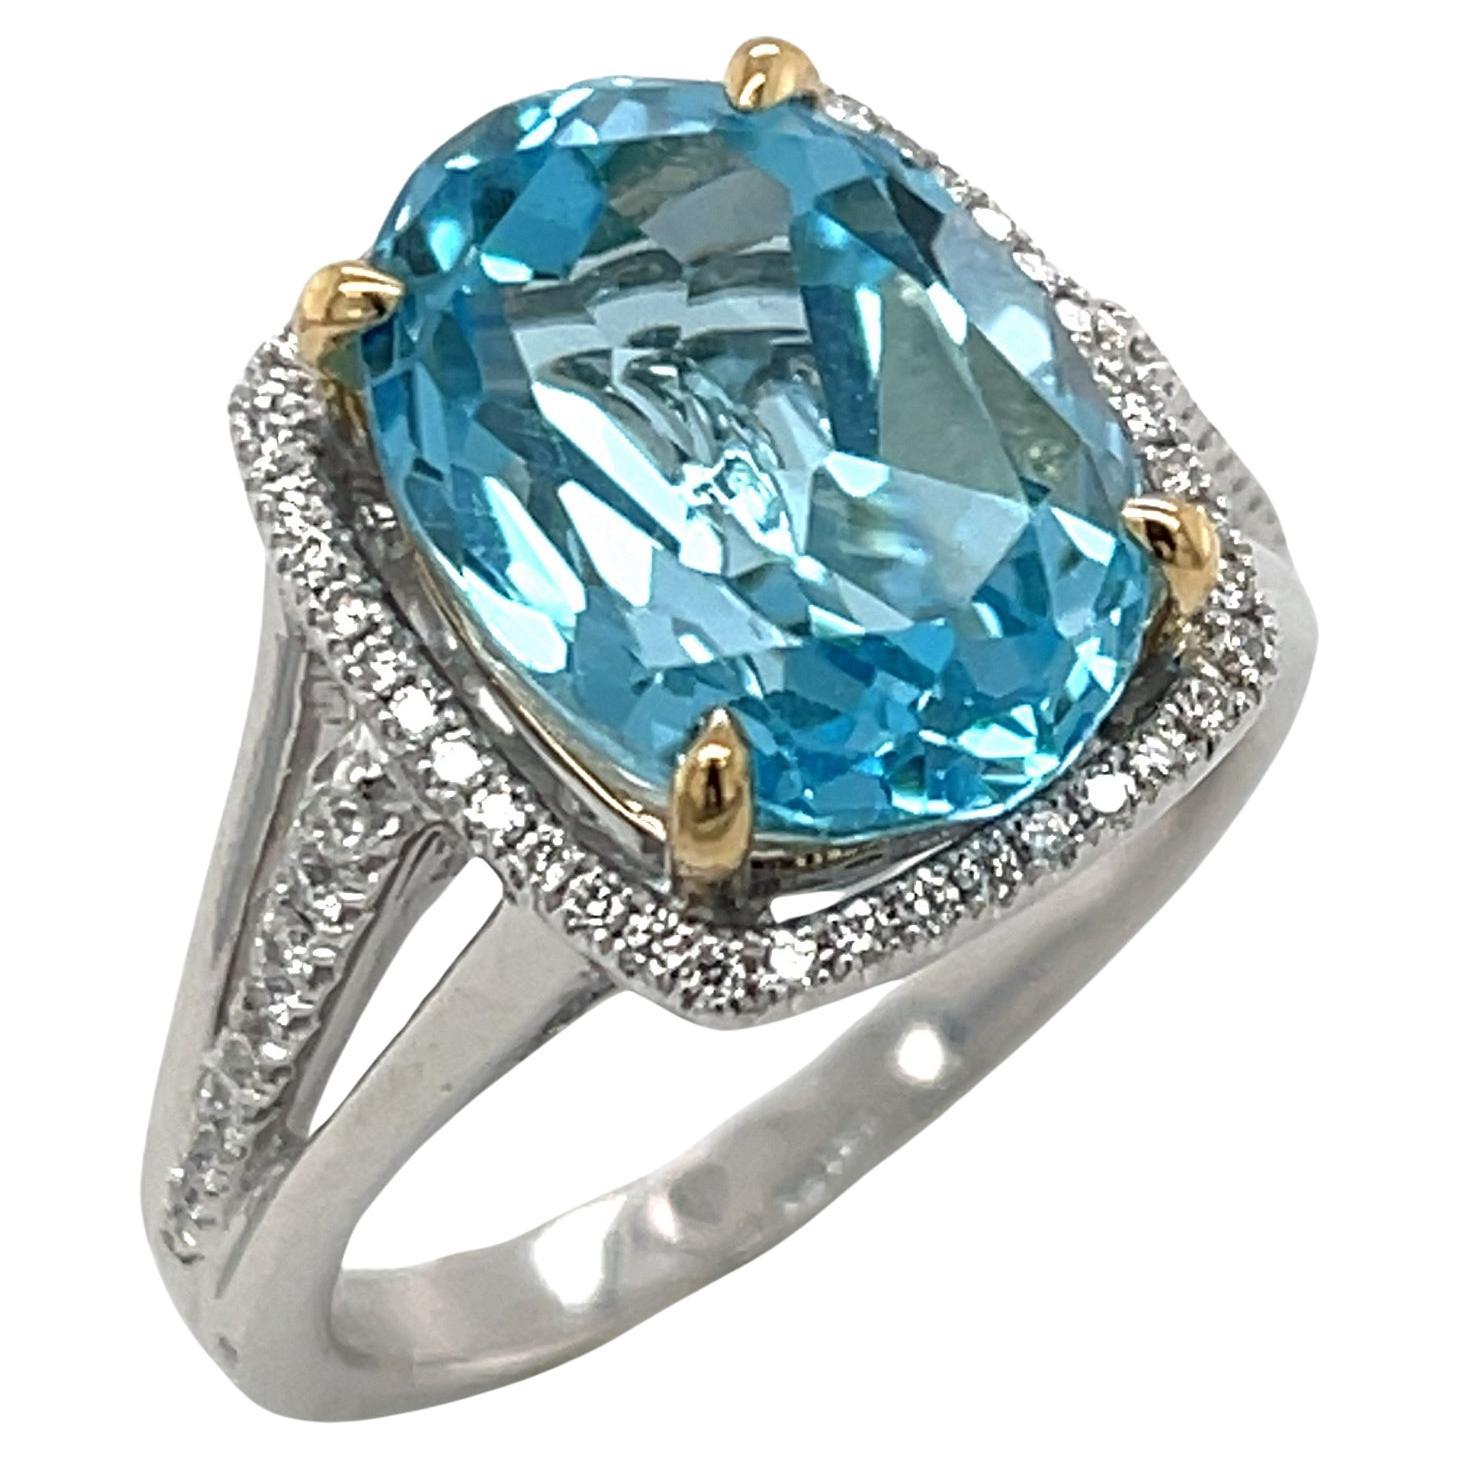 8.59 Carat Blue Topaz and Diamond Halo Cocktail Ring in White and Yellow Gold For Sale